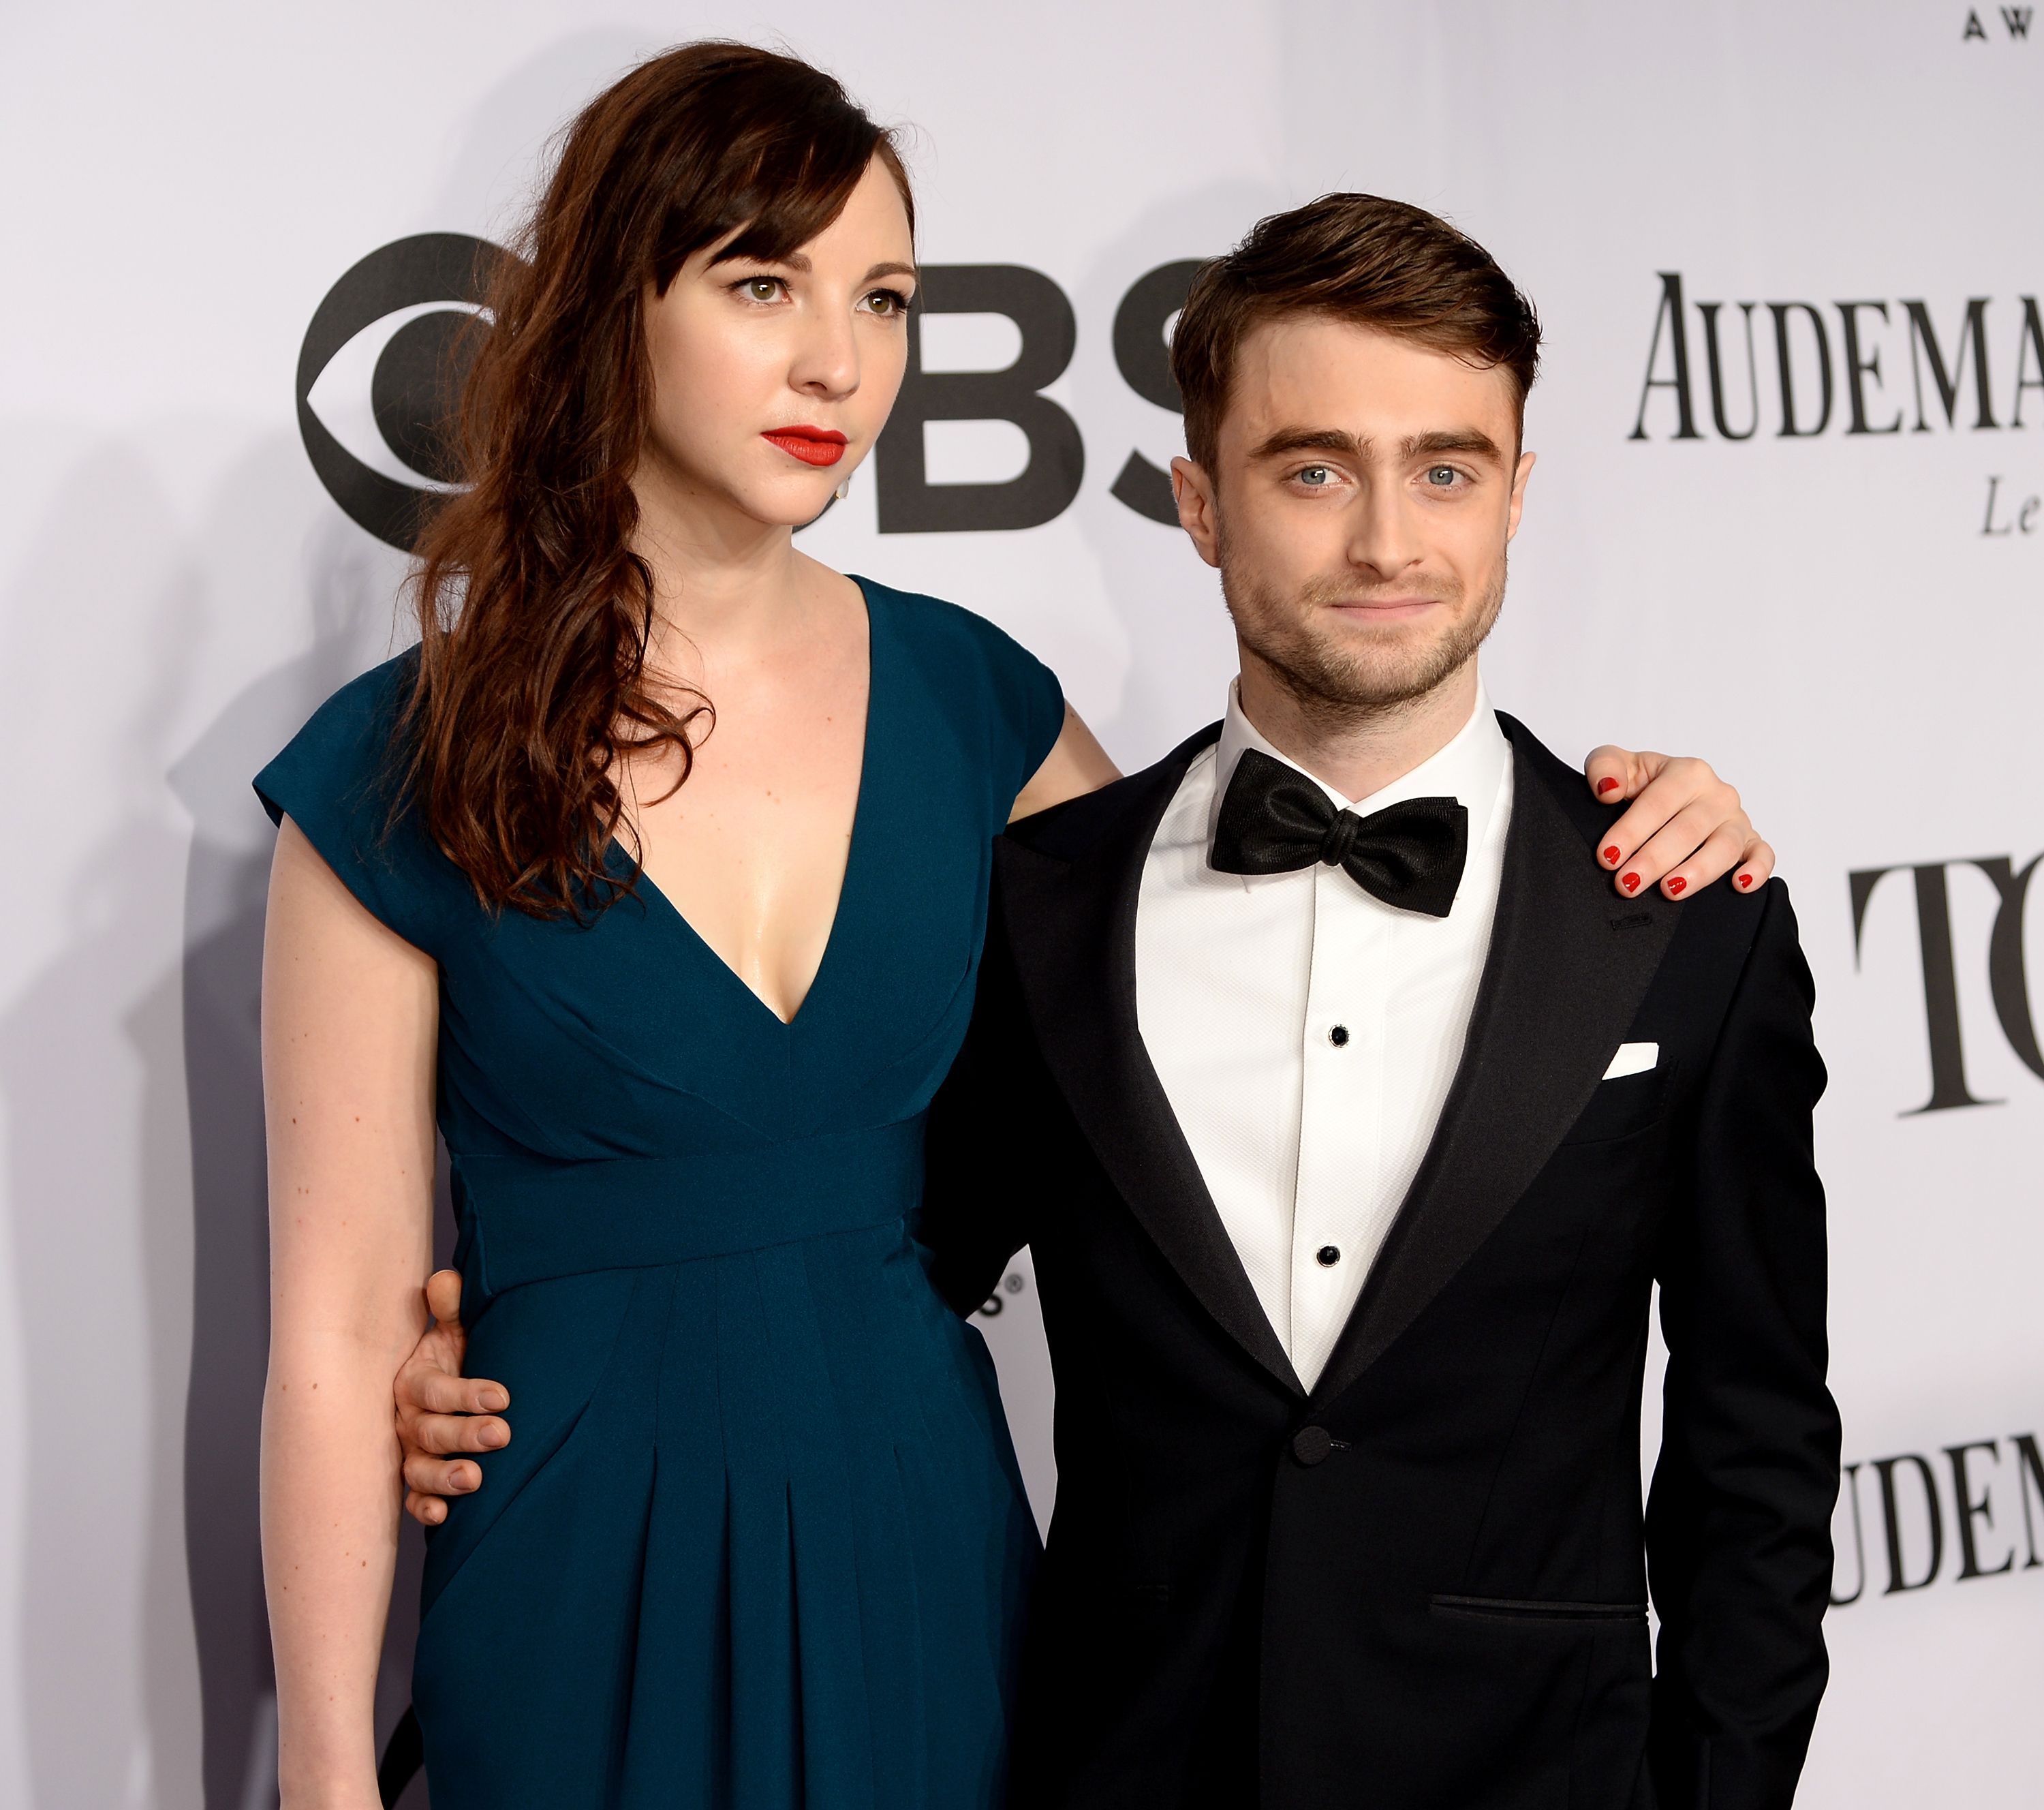 Daniel Radcliffe and Erin Darke at the 68th Annual Tony Awards in 2014 in New York City | Source: Getty Images